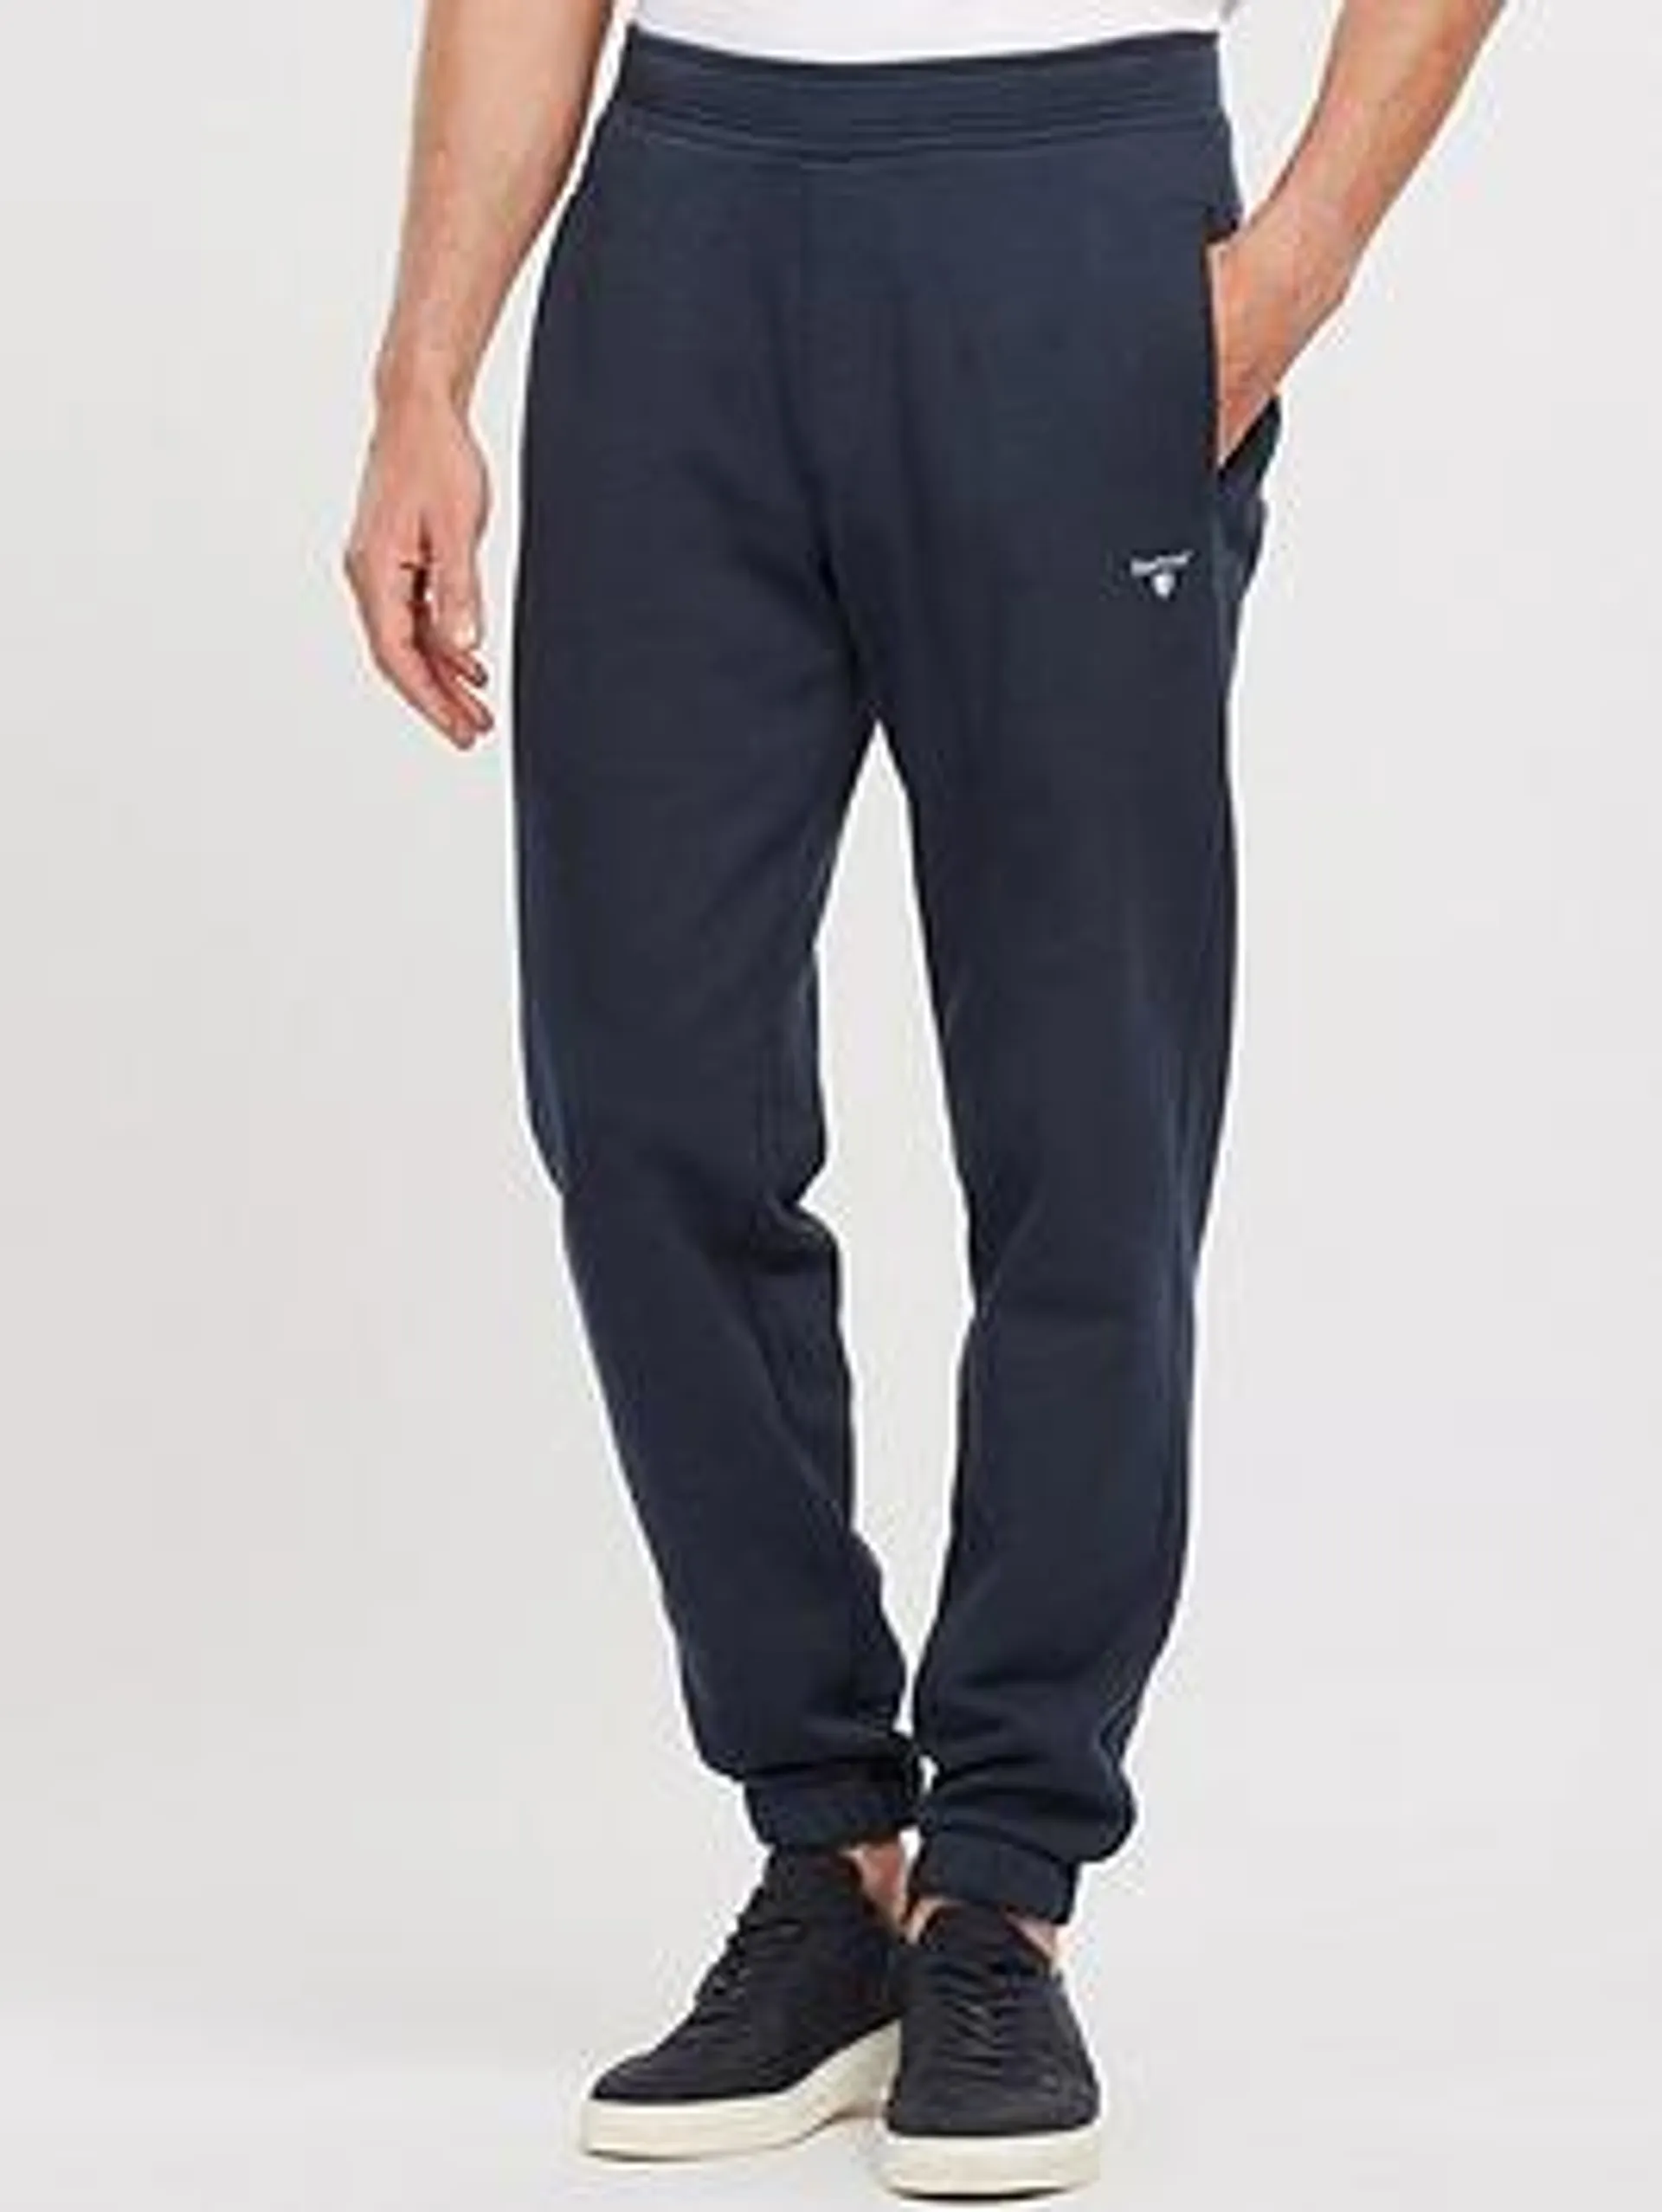 Barbour Essential Jersey Joggers - Navy